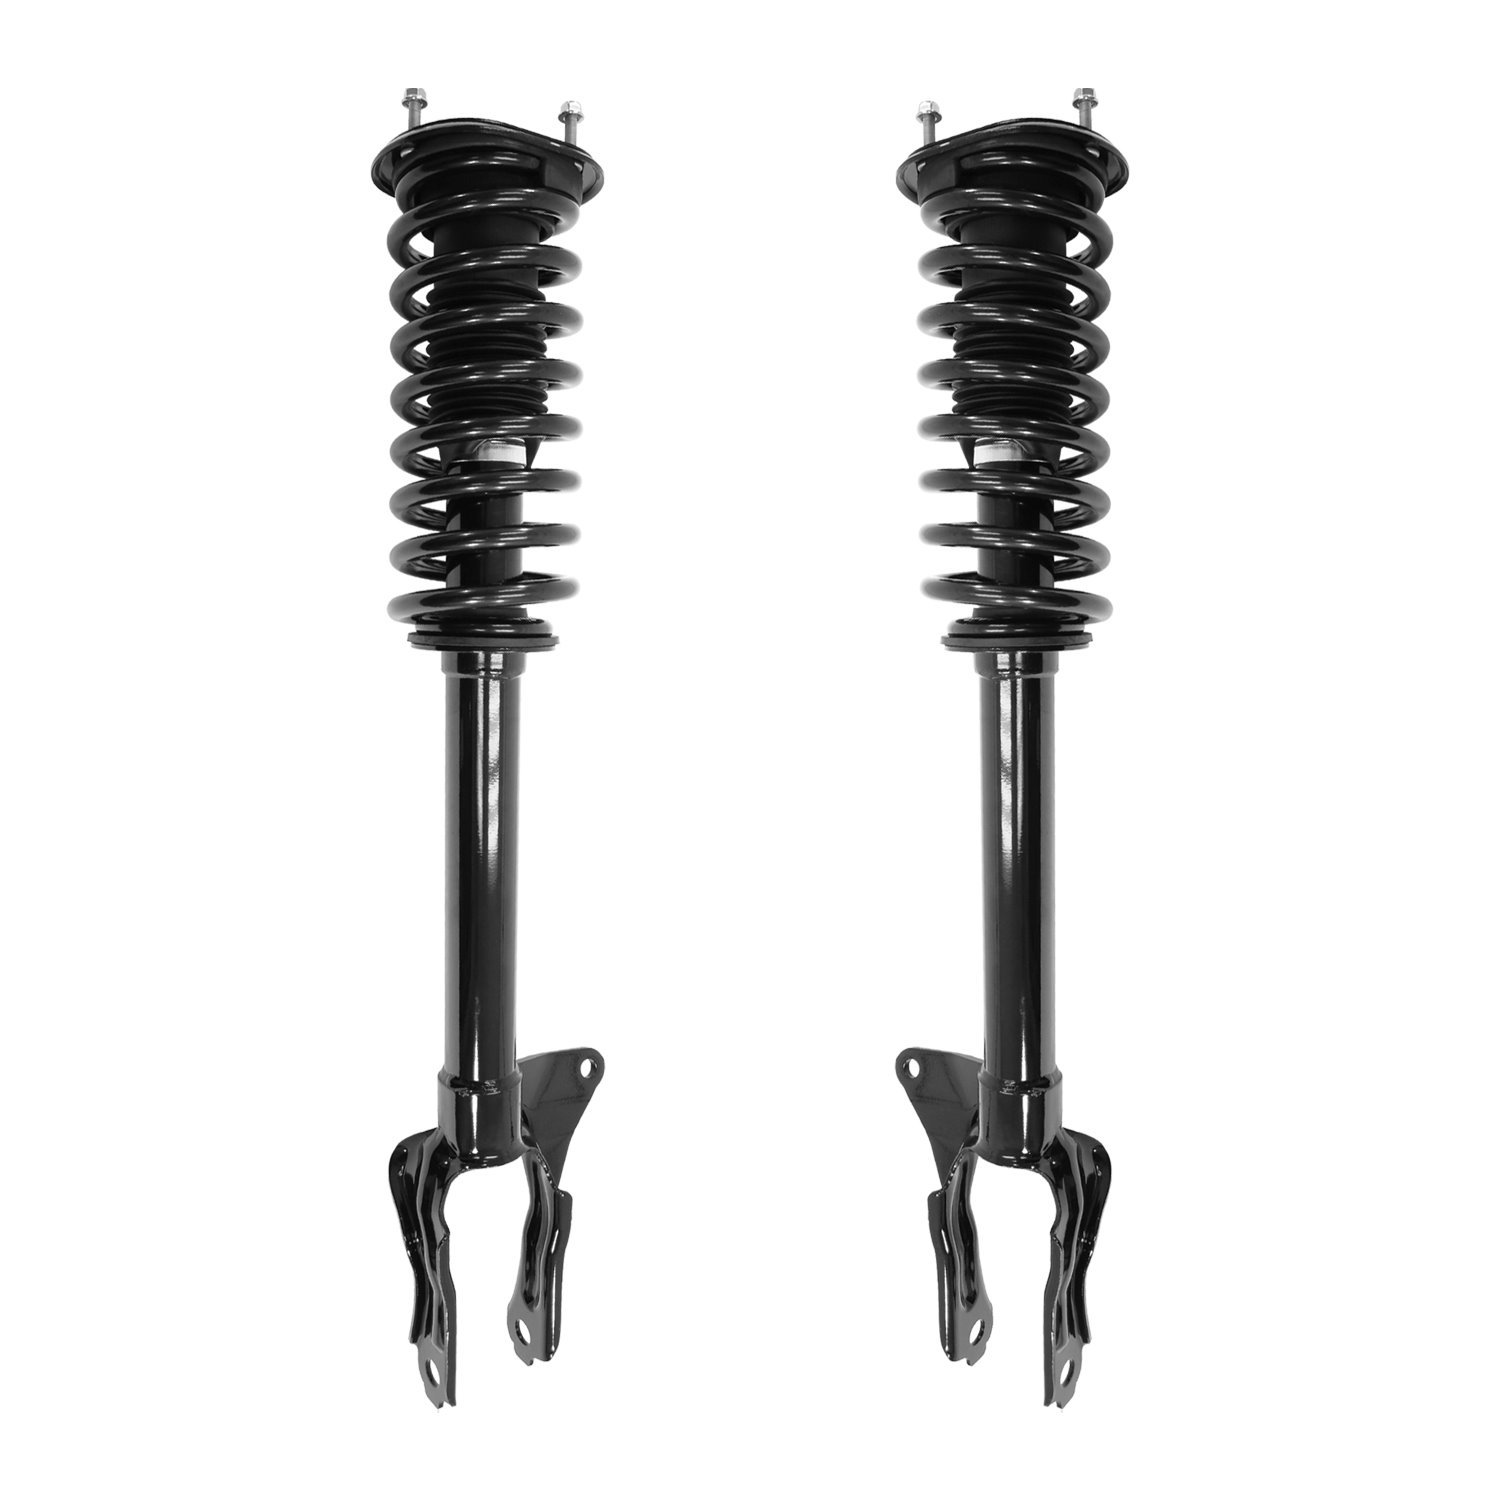 2-11225-11226-001 Suspension Strut & Coil Spring Assembly Set Fits Select Jeep Grand Cherokee